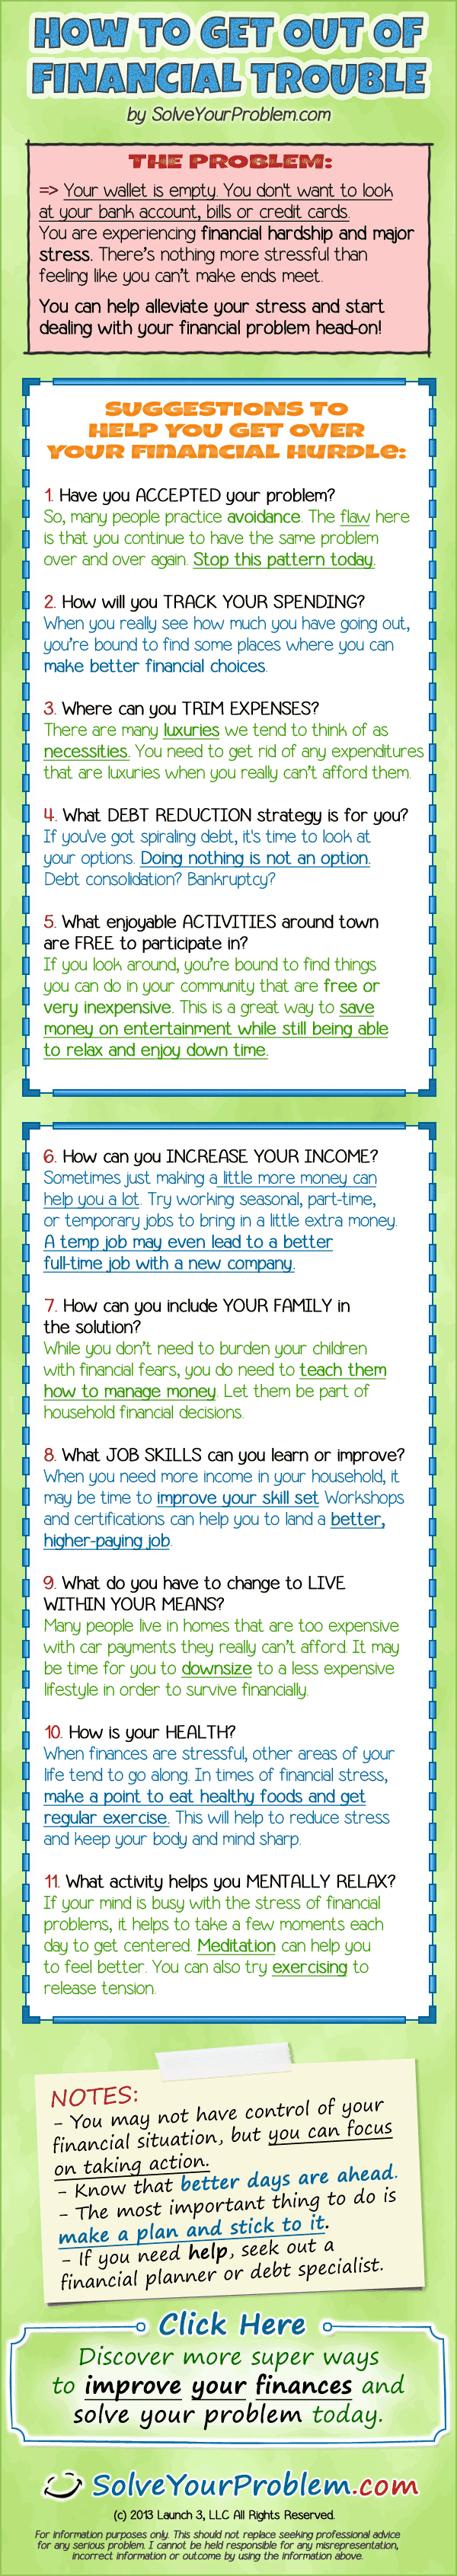 How To Get Out Of Financial Trouble